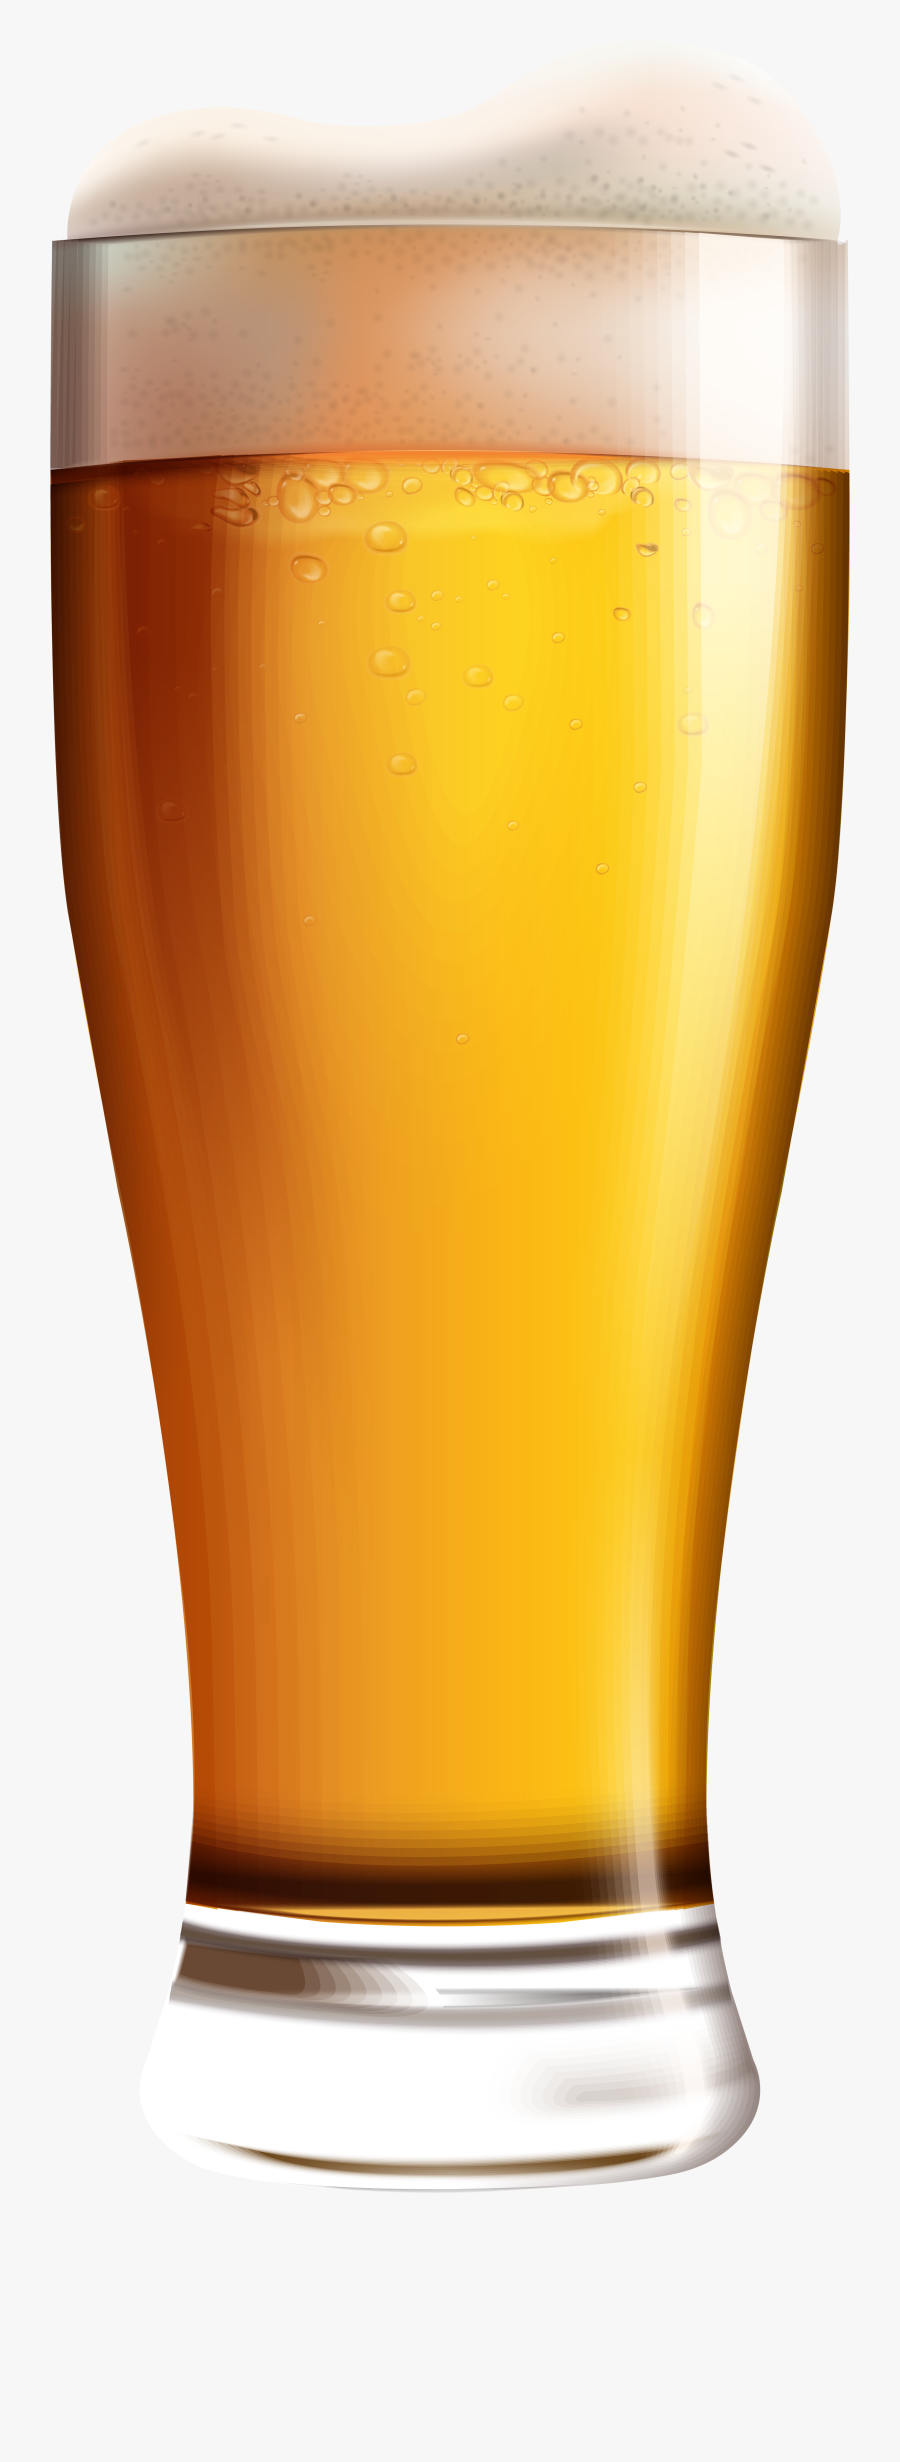 Glass Of Beer Png, Transparent Clipart